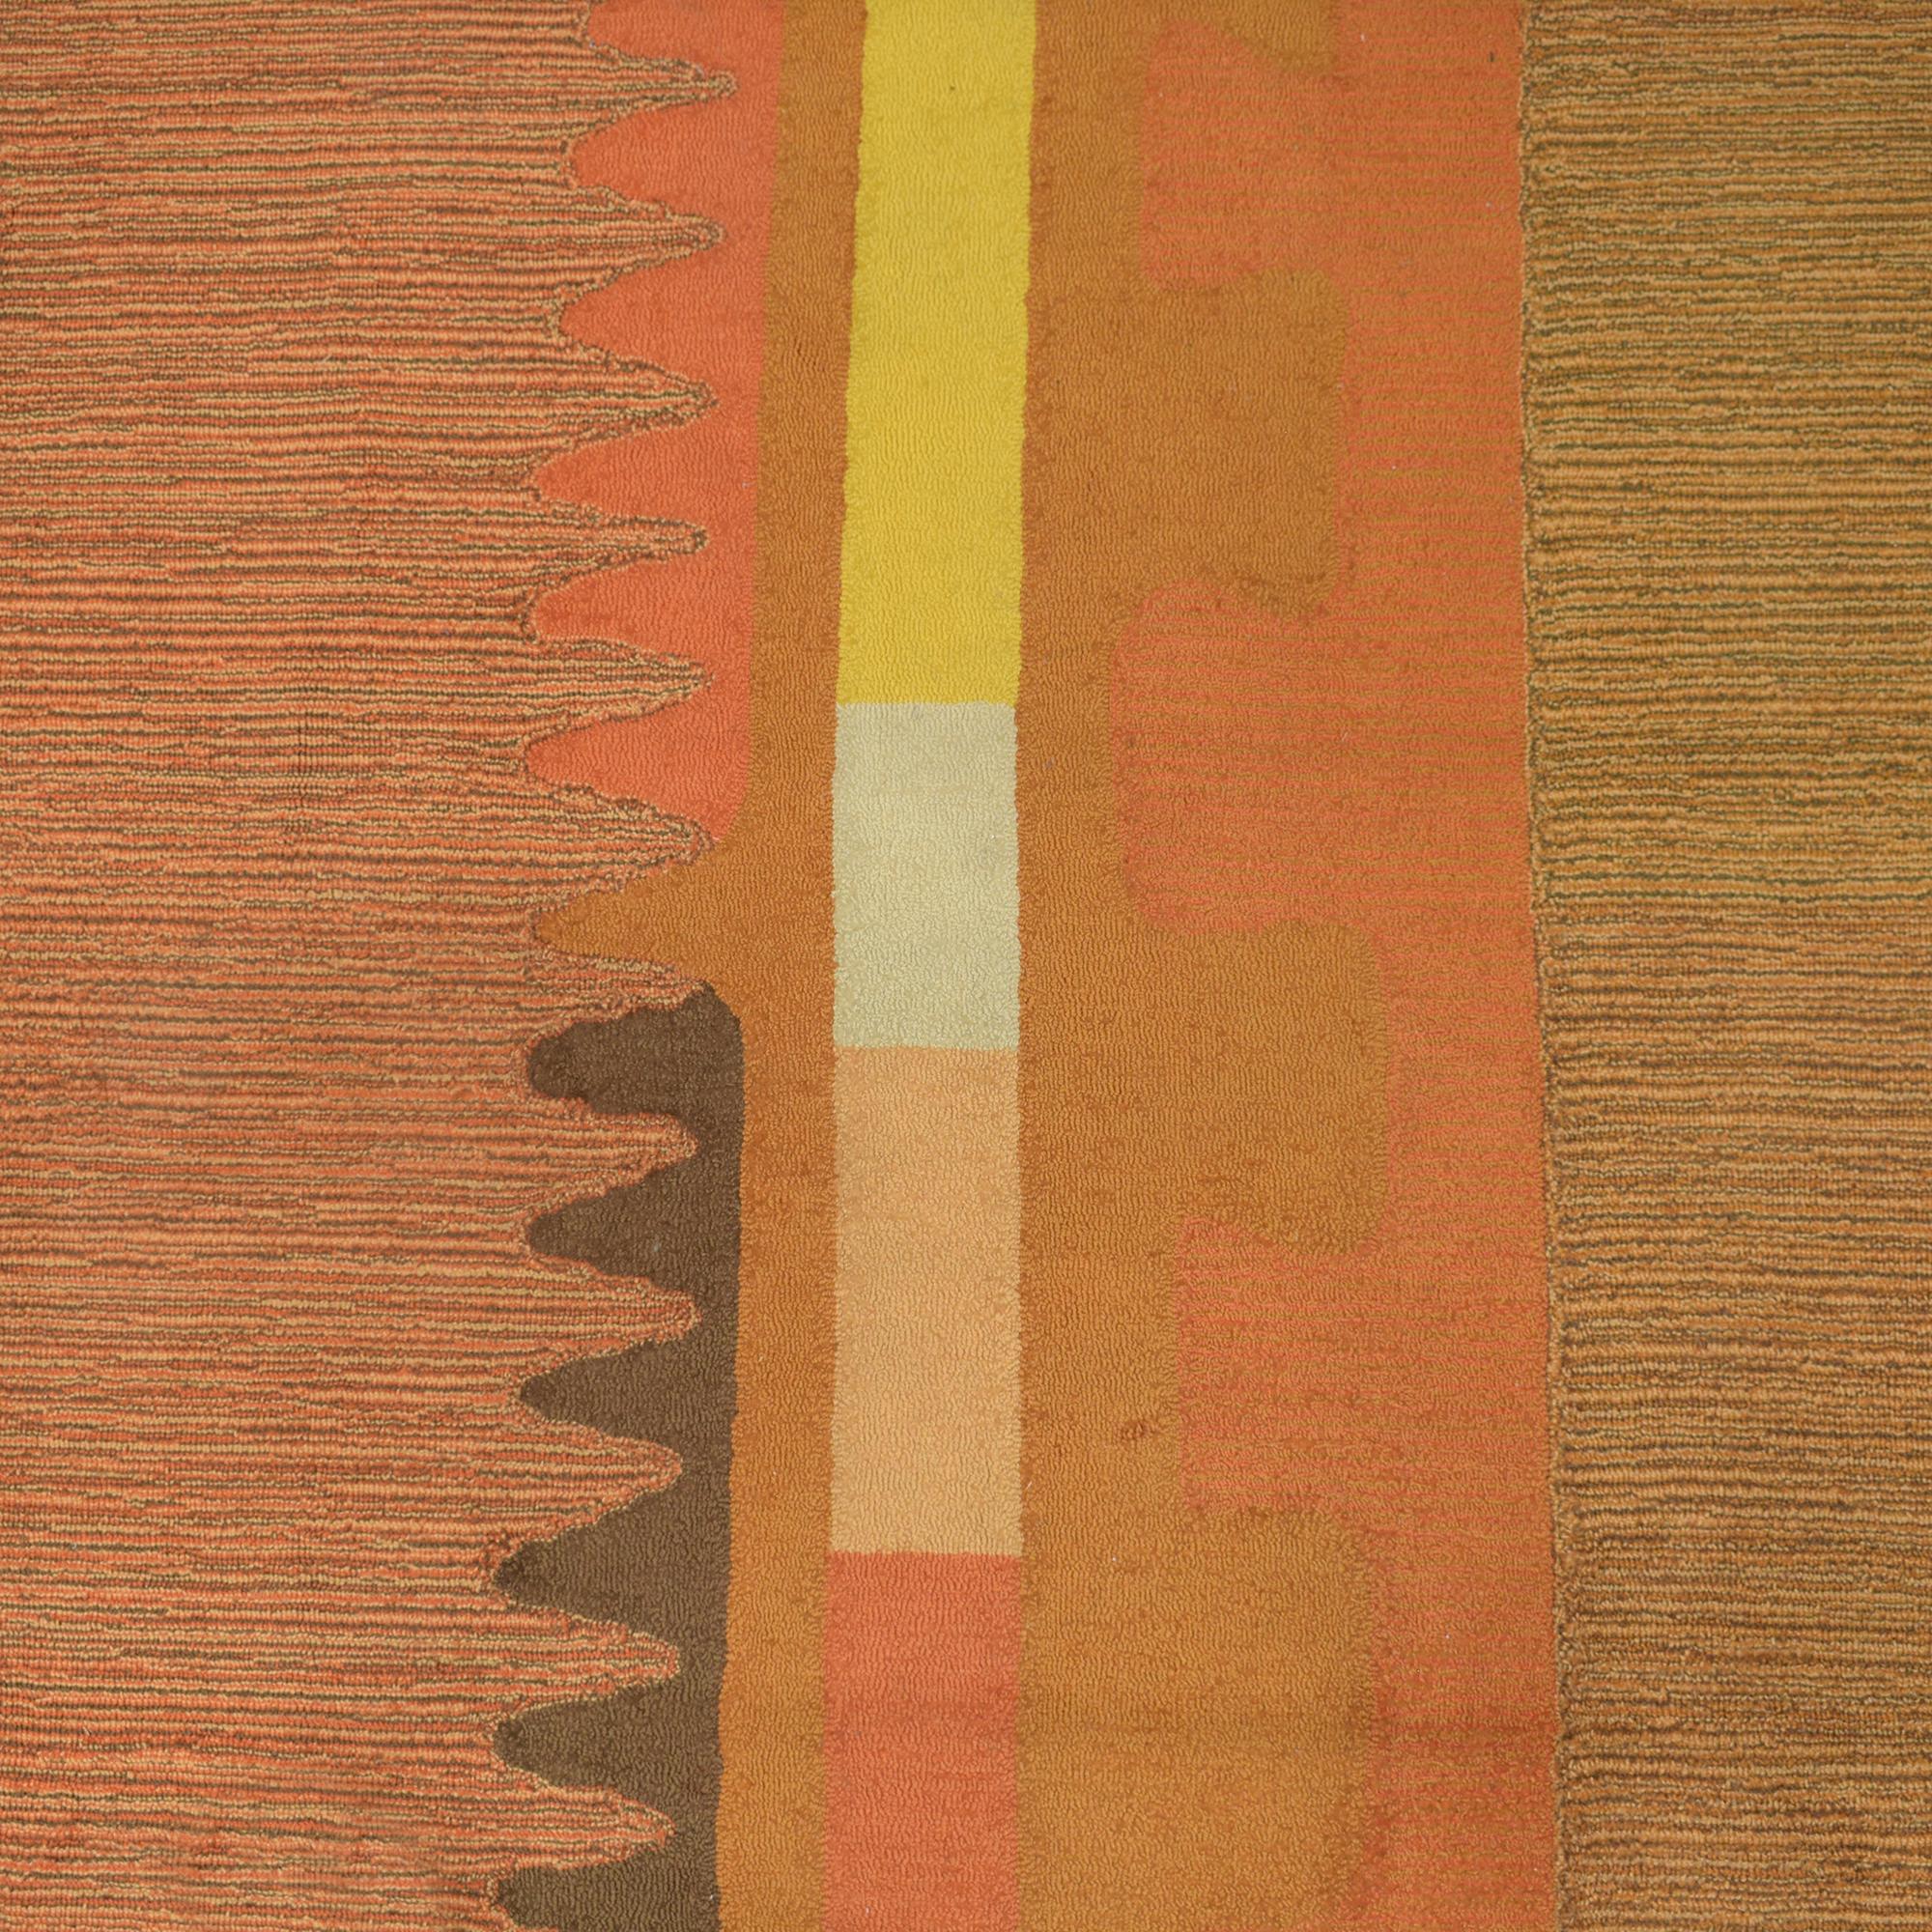 Fabric 1970s Edward Fields Modern-style Wool Area Rug: Authentic Designer Piece For Sale